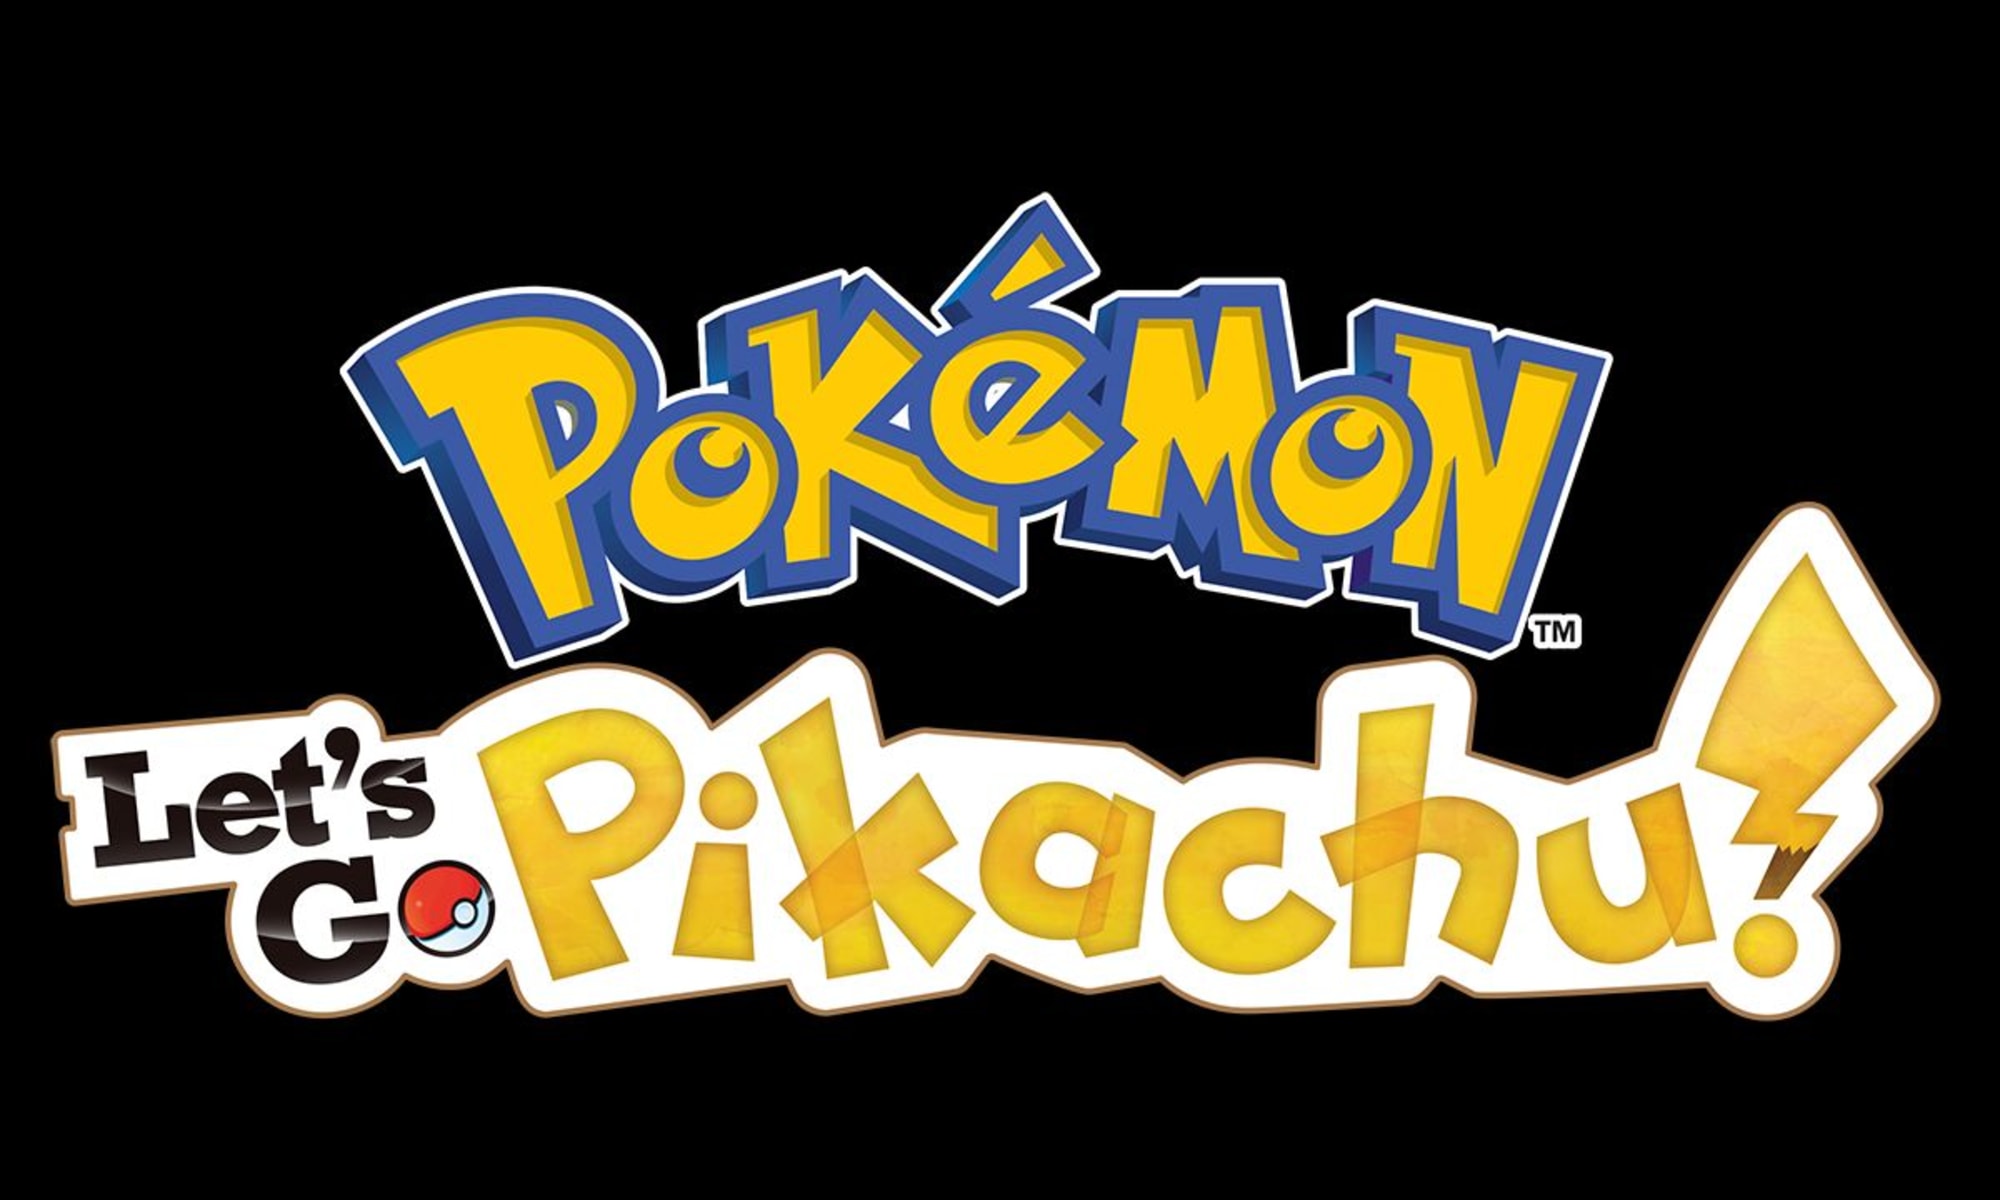 Pokemon Let's Go Pikachu preview: Not for me, but that's okay